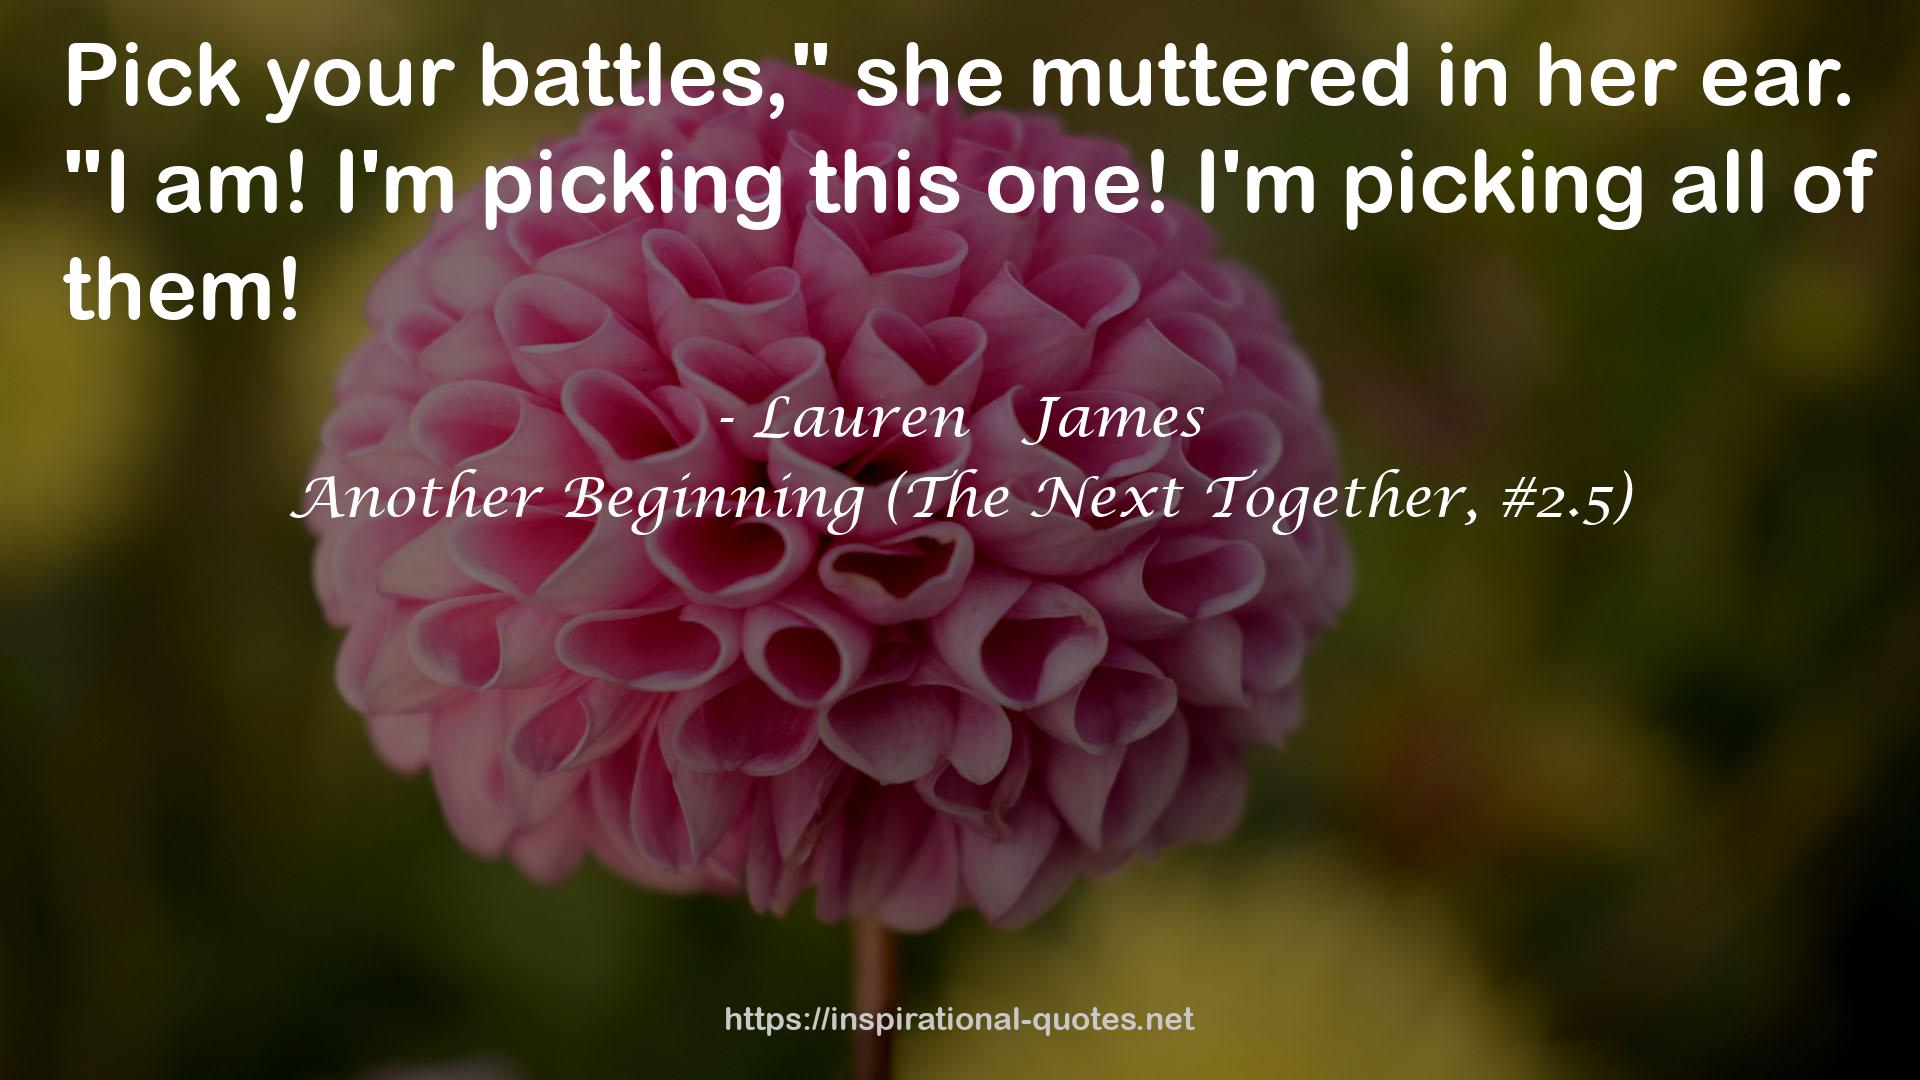 Another Beginning (The Next Together, #2.5) QUOTES